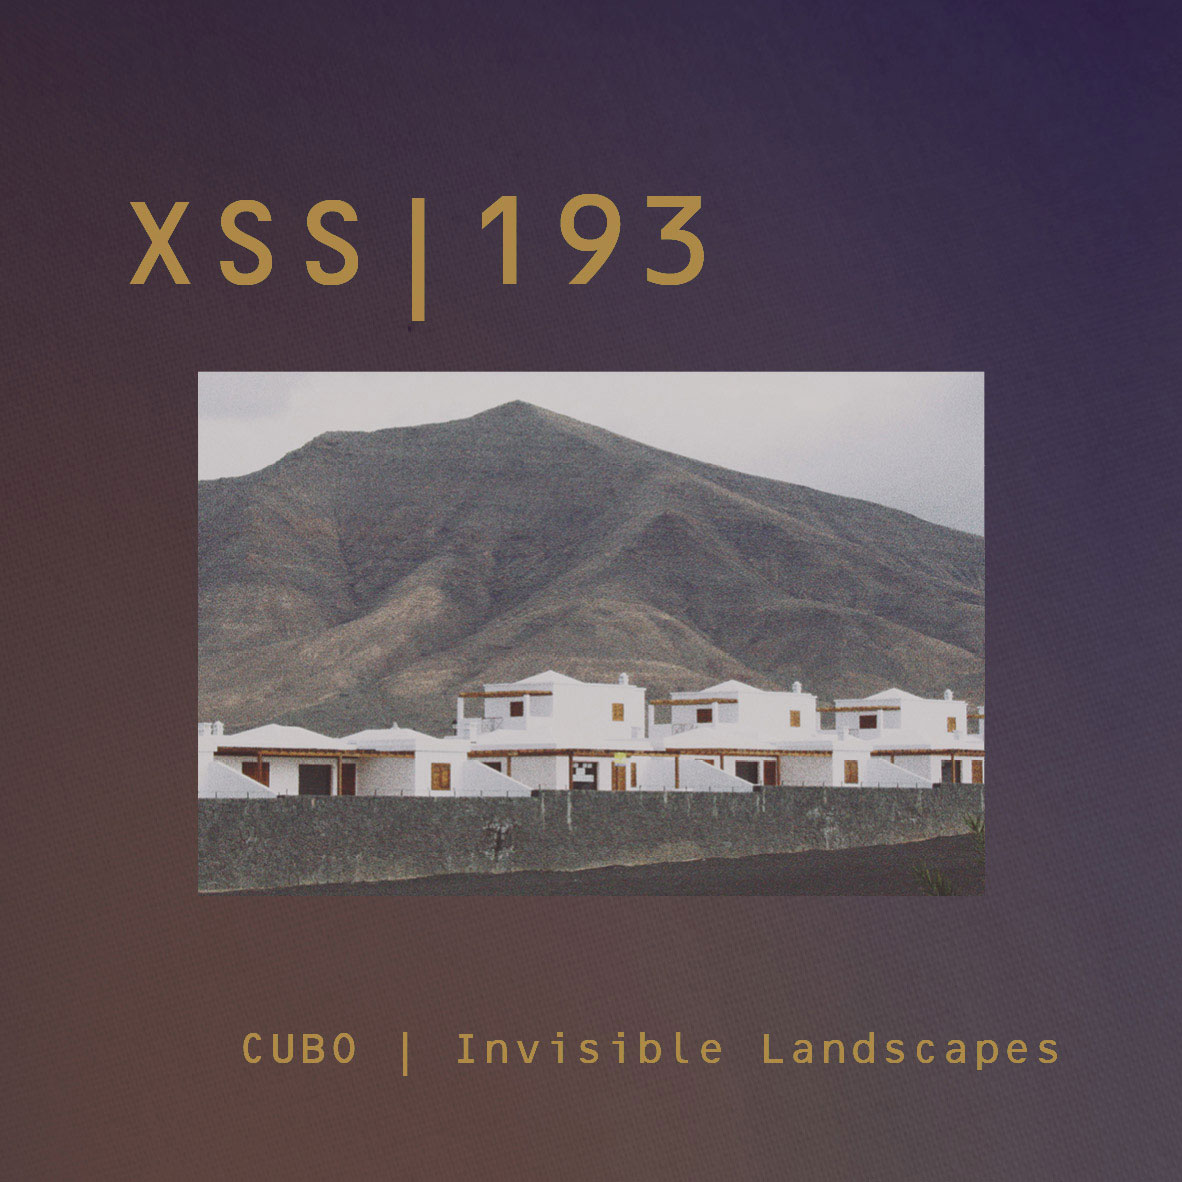 XSS193 | Cubo | Invisible Landscapes